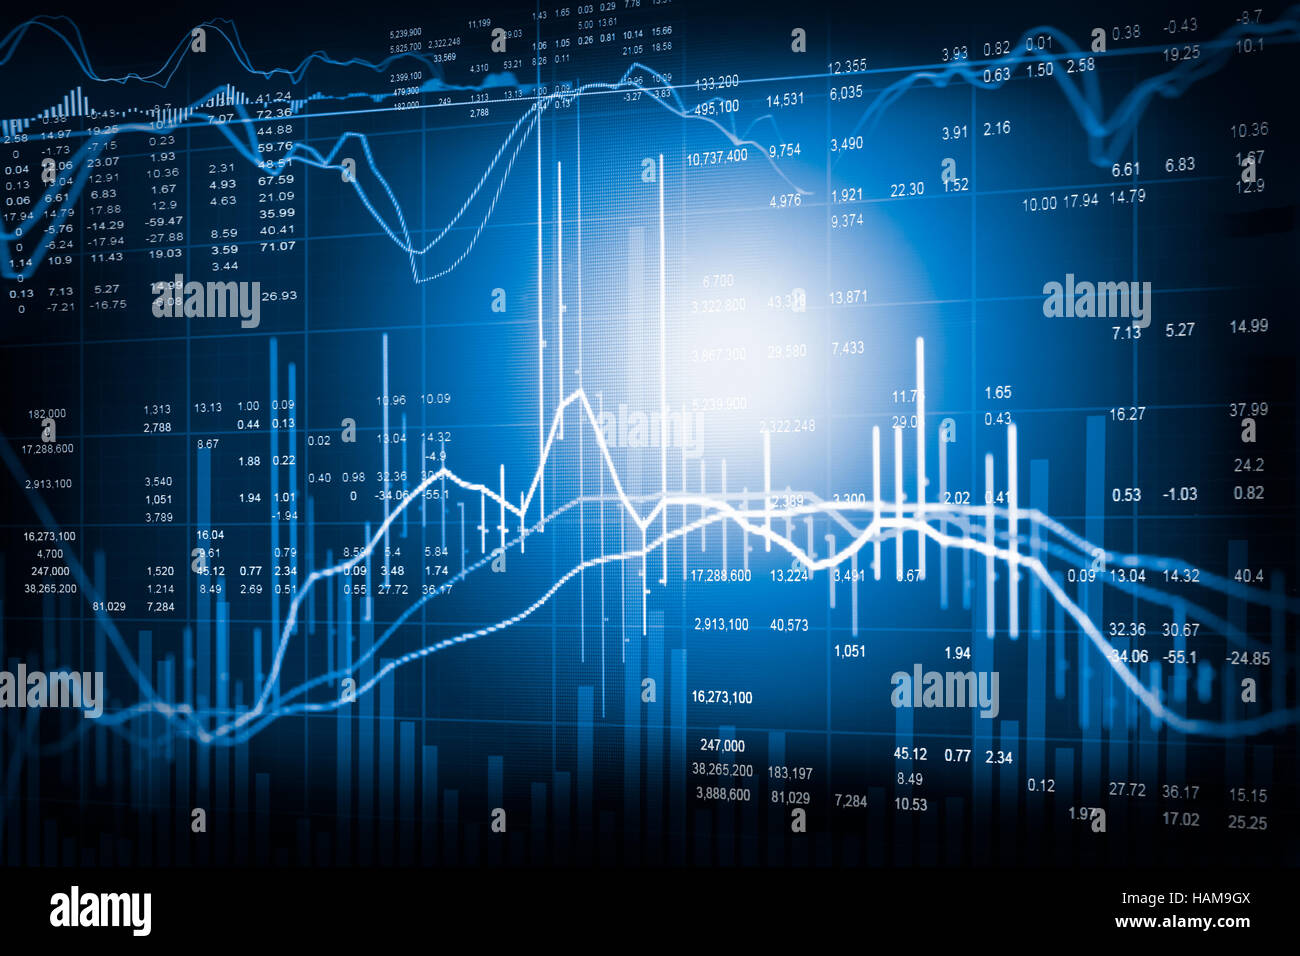 Financial stock market data. Candle stick graph chart of stock market ,stock market data graph chart on LED concept Stock Photo